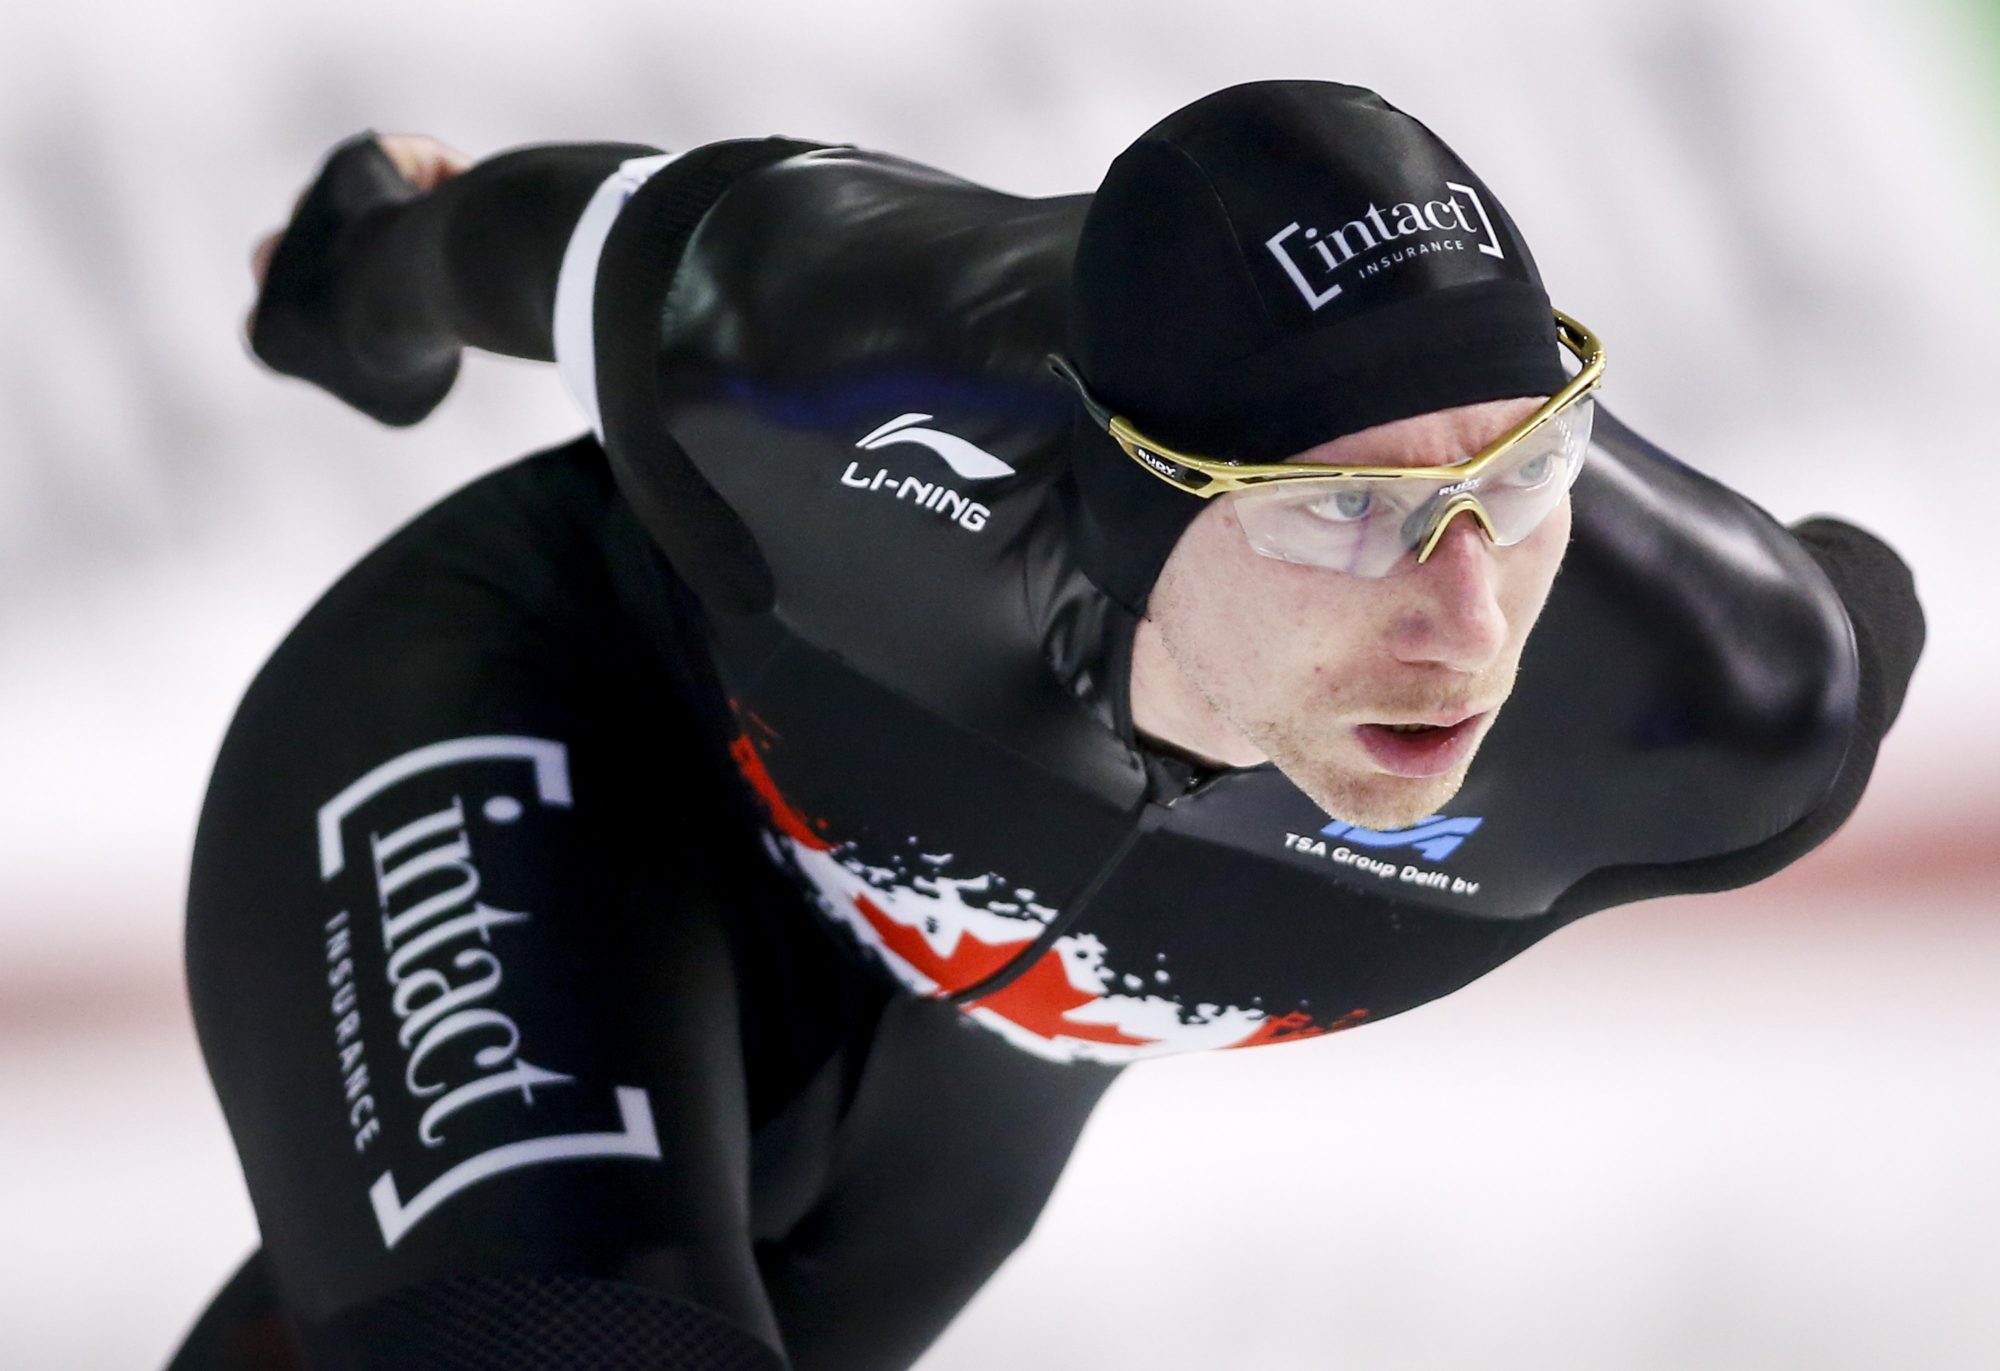 Ted-Jan Bloemen competes in a speed skating race